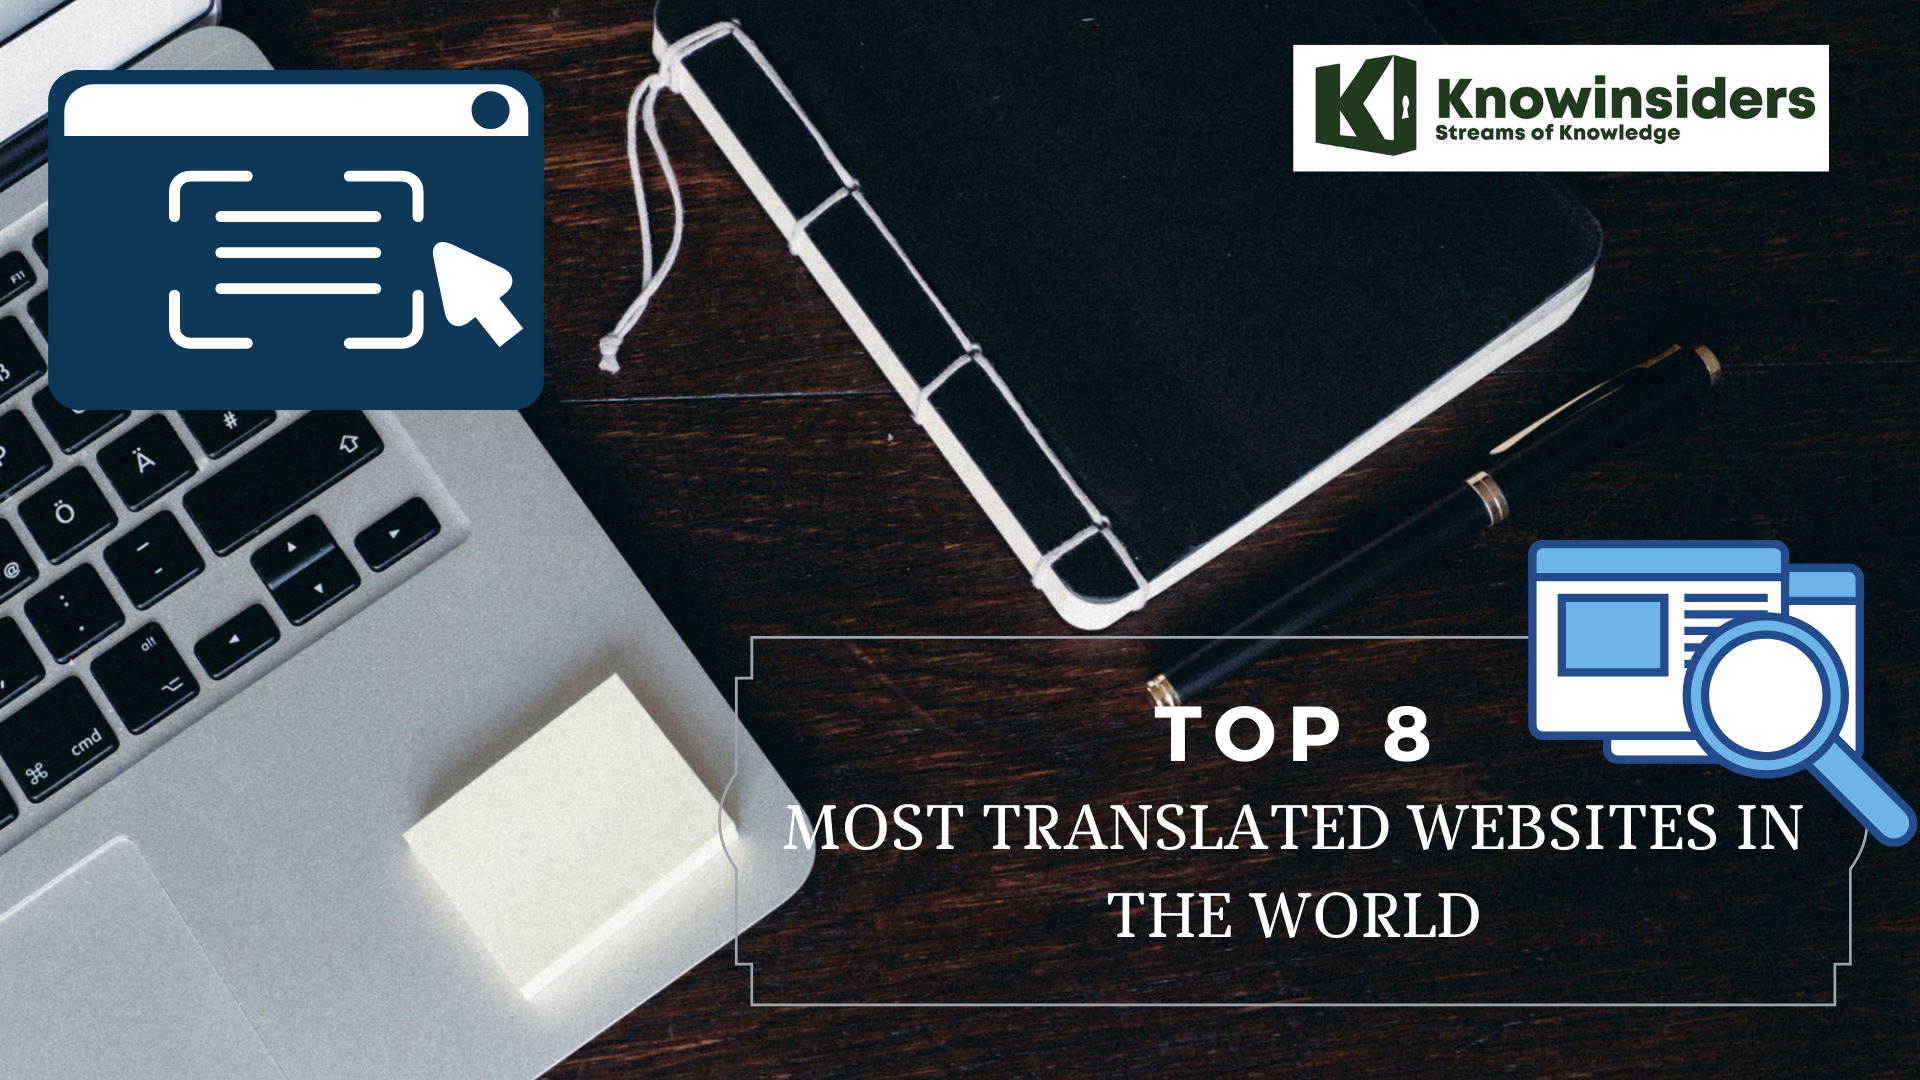 Top 8 Best Translated Websites In The World 2021/2022